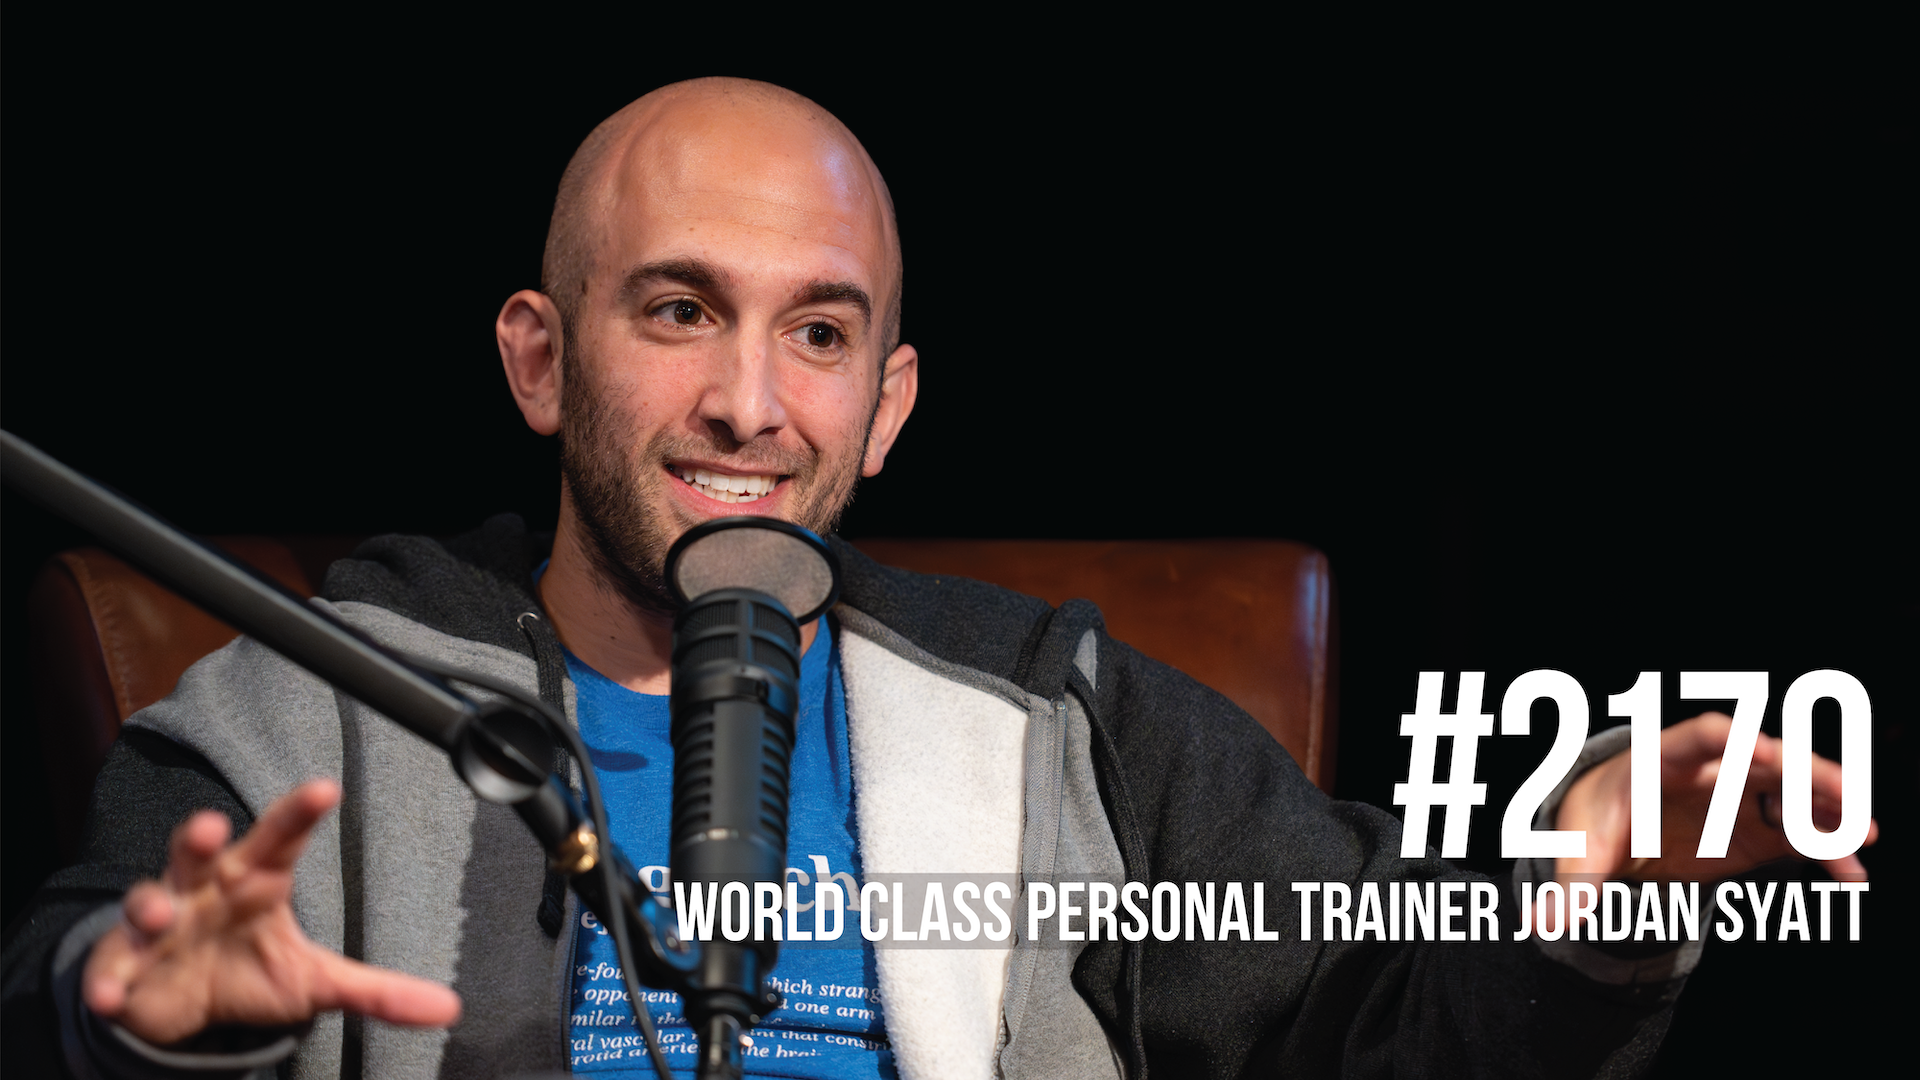 2170: Inside the Mind of a World Class Personal Trainer With Jordan Syatt